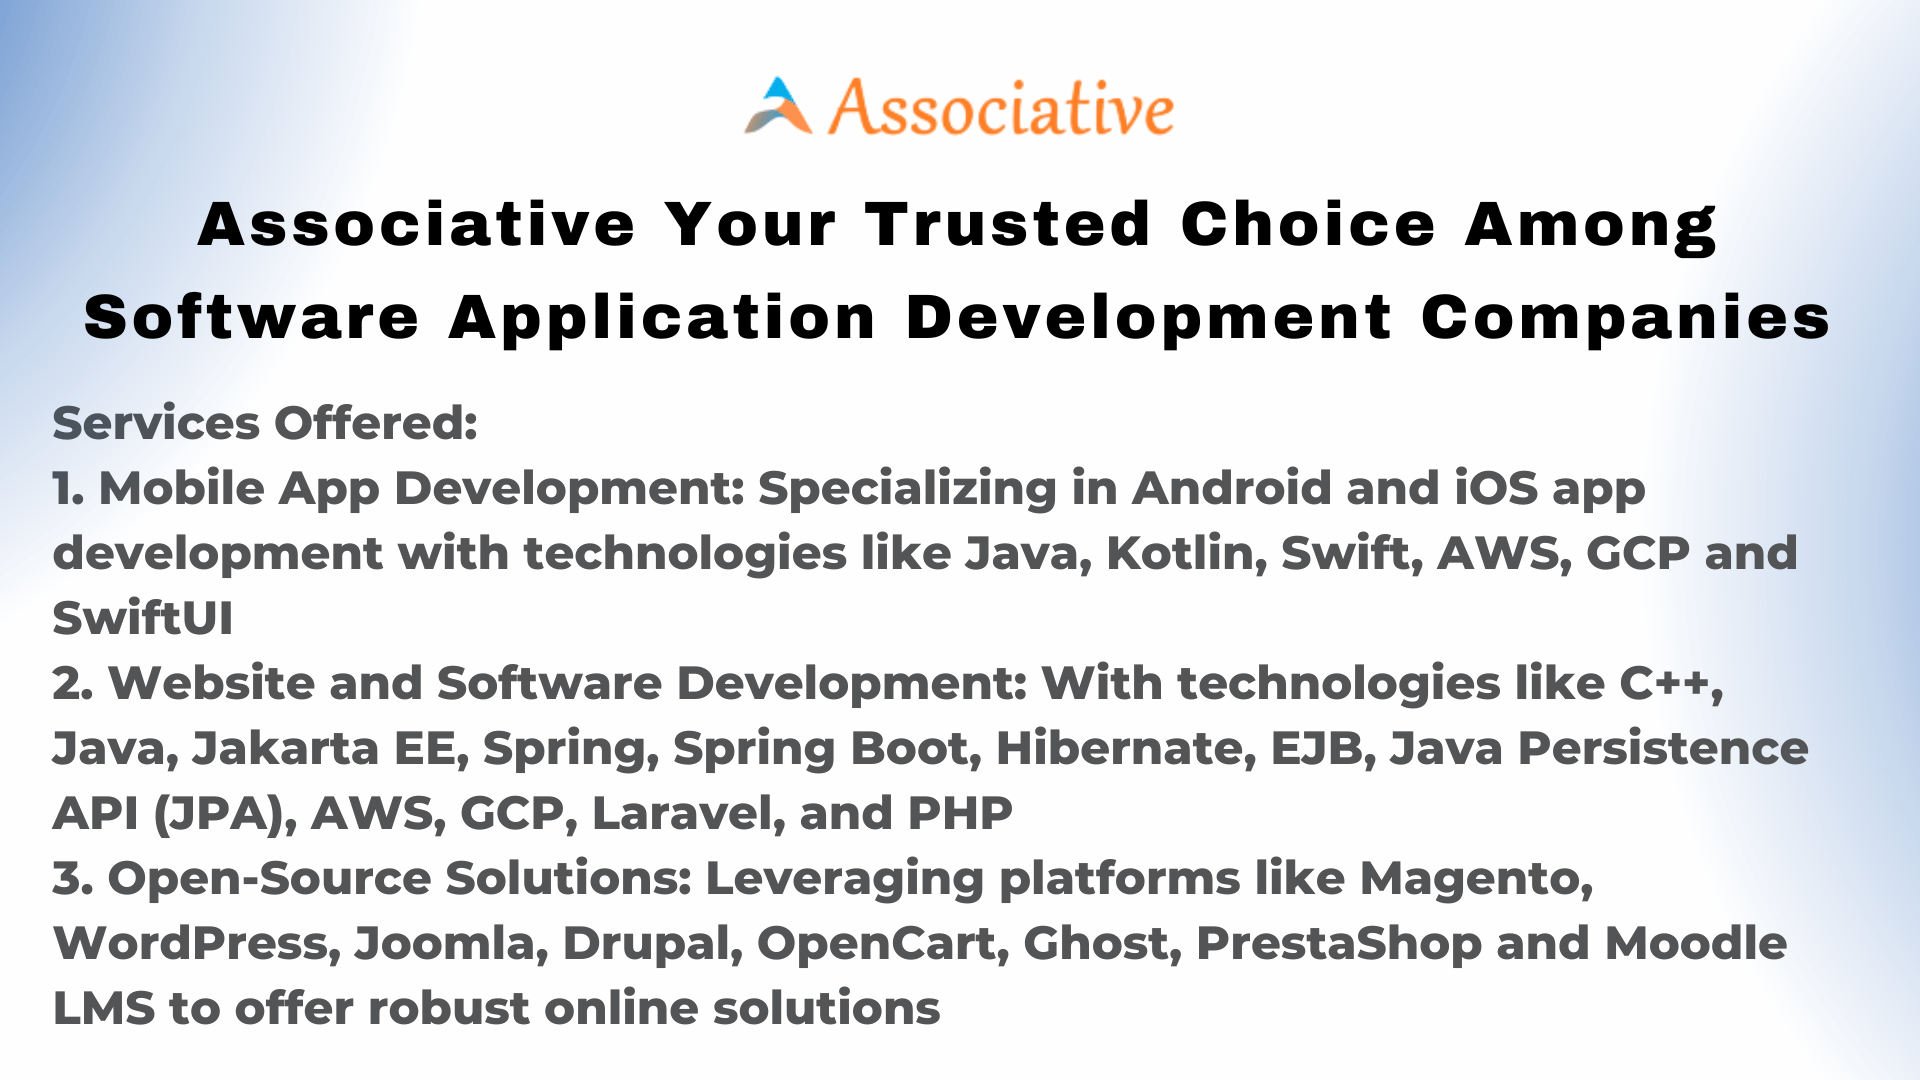 Associative Your Trusted Choice Among Software Application Development Companies